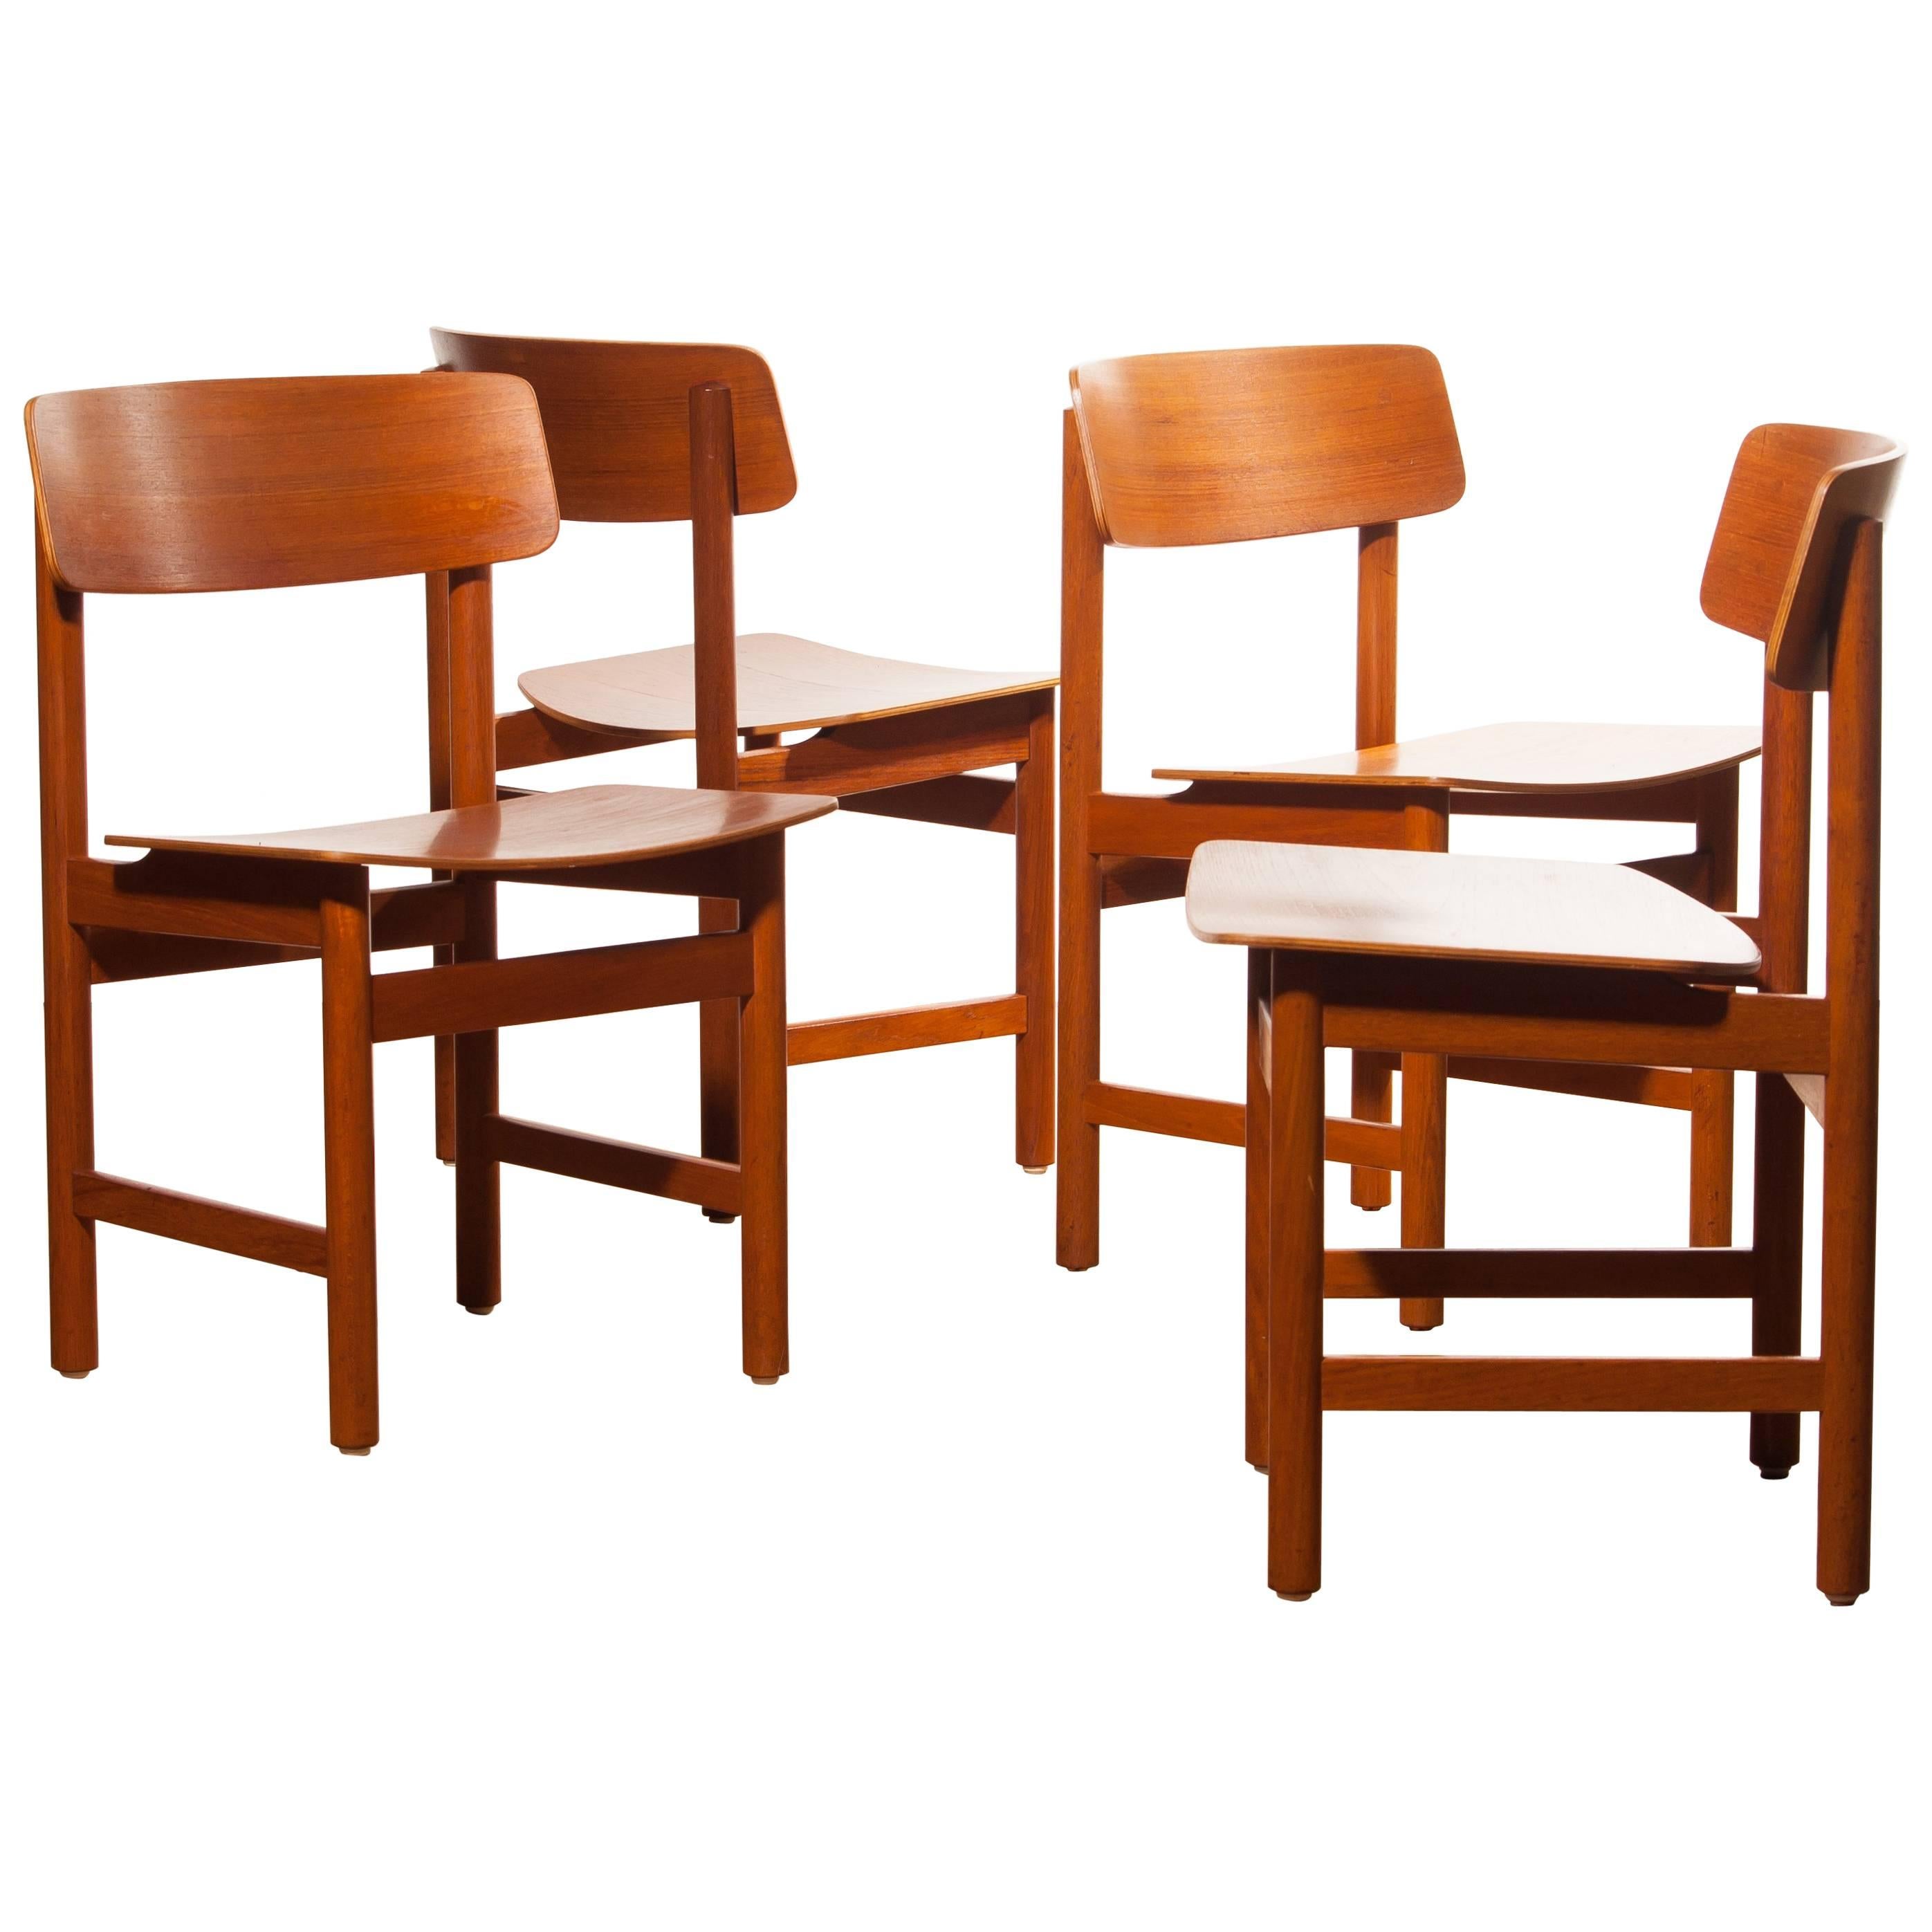 1960s, a Set of Four Teak Plywood Dining Chairs by Børge Mogensen Attributes